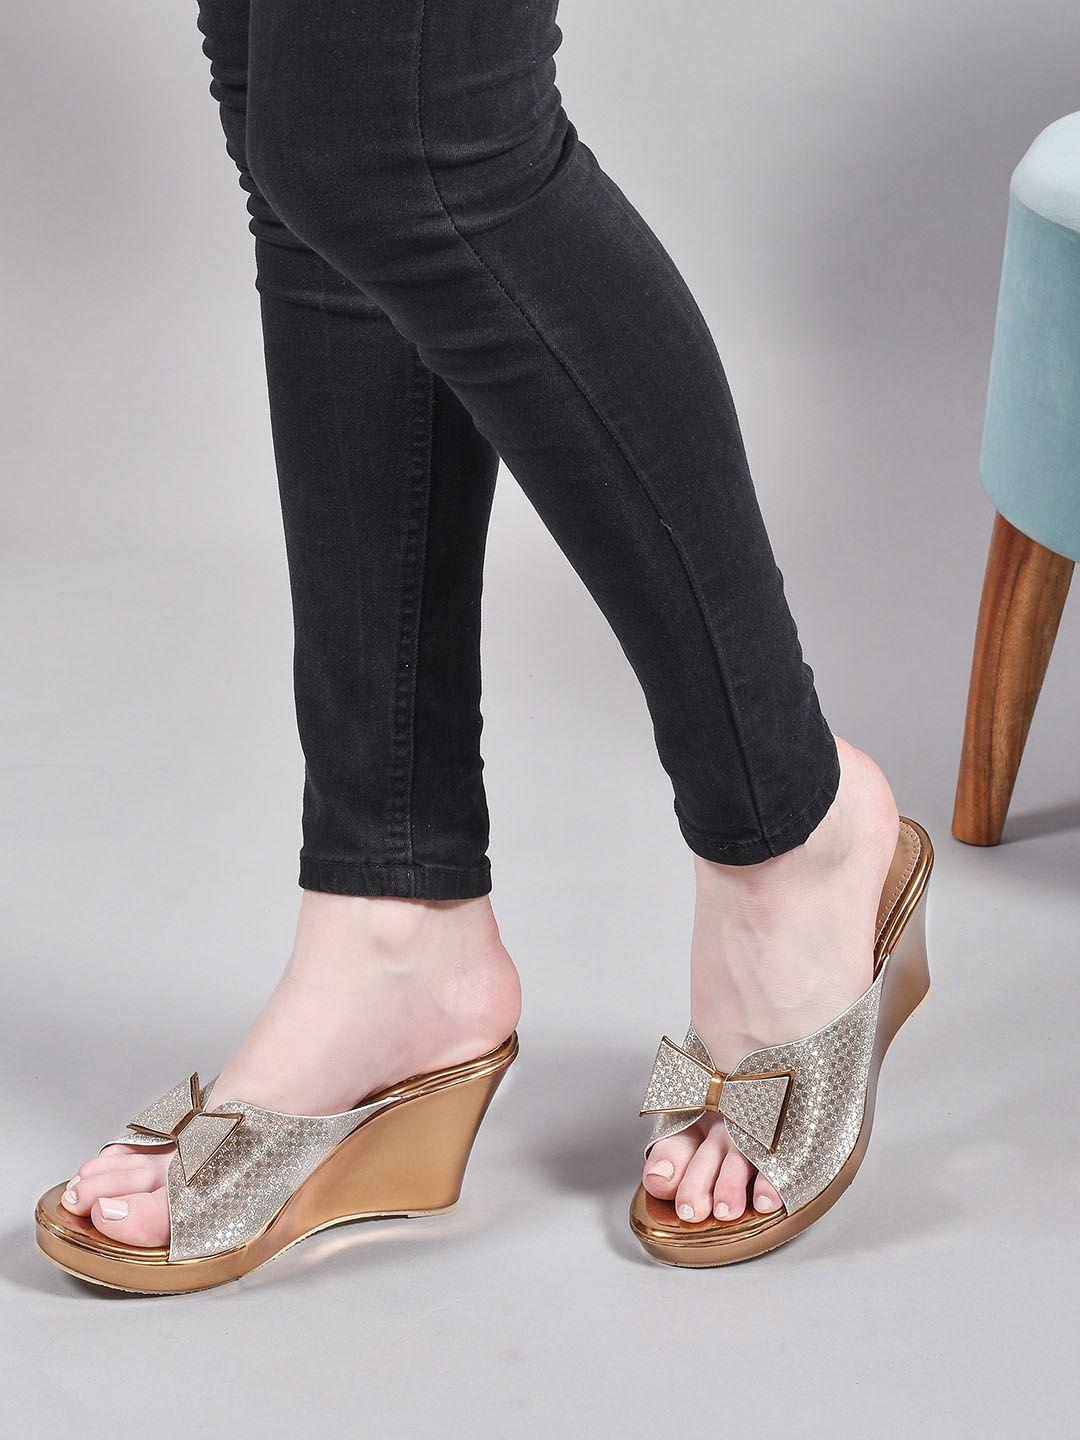 action embellished open toe wedges with bows